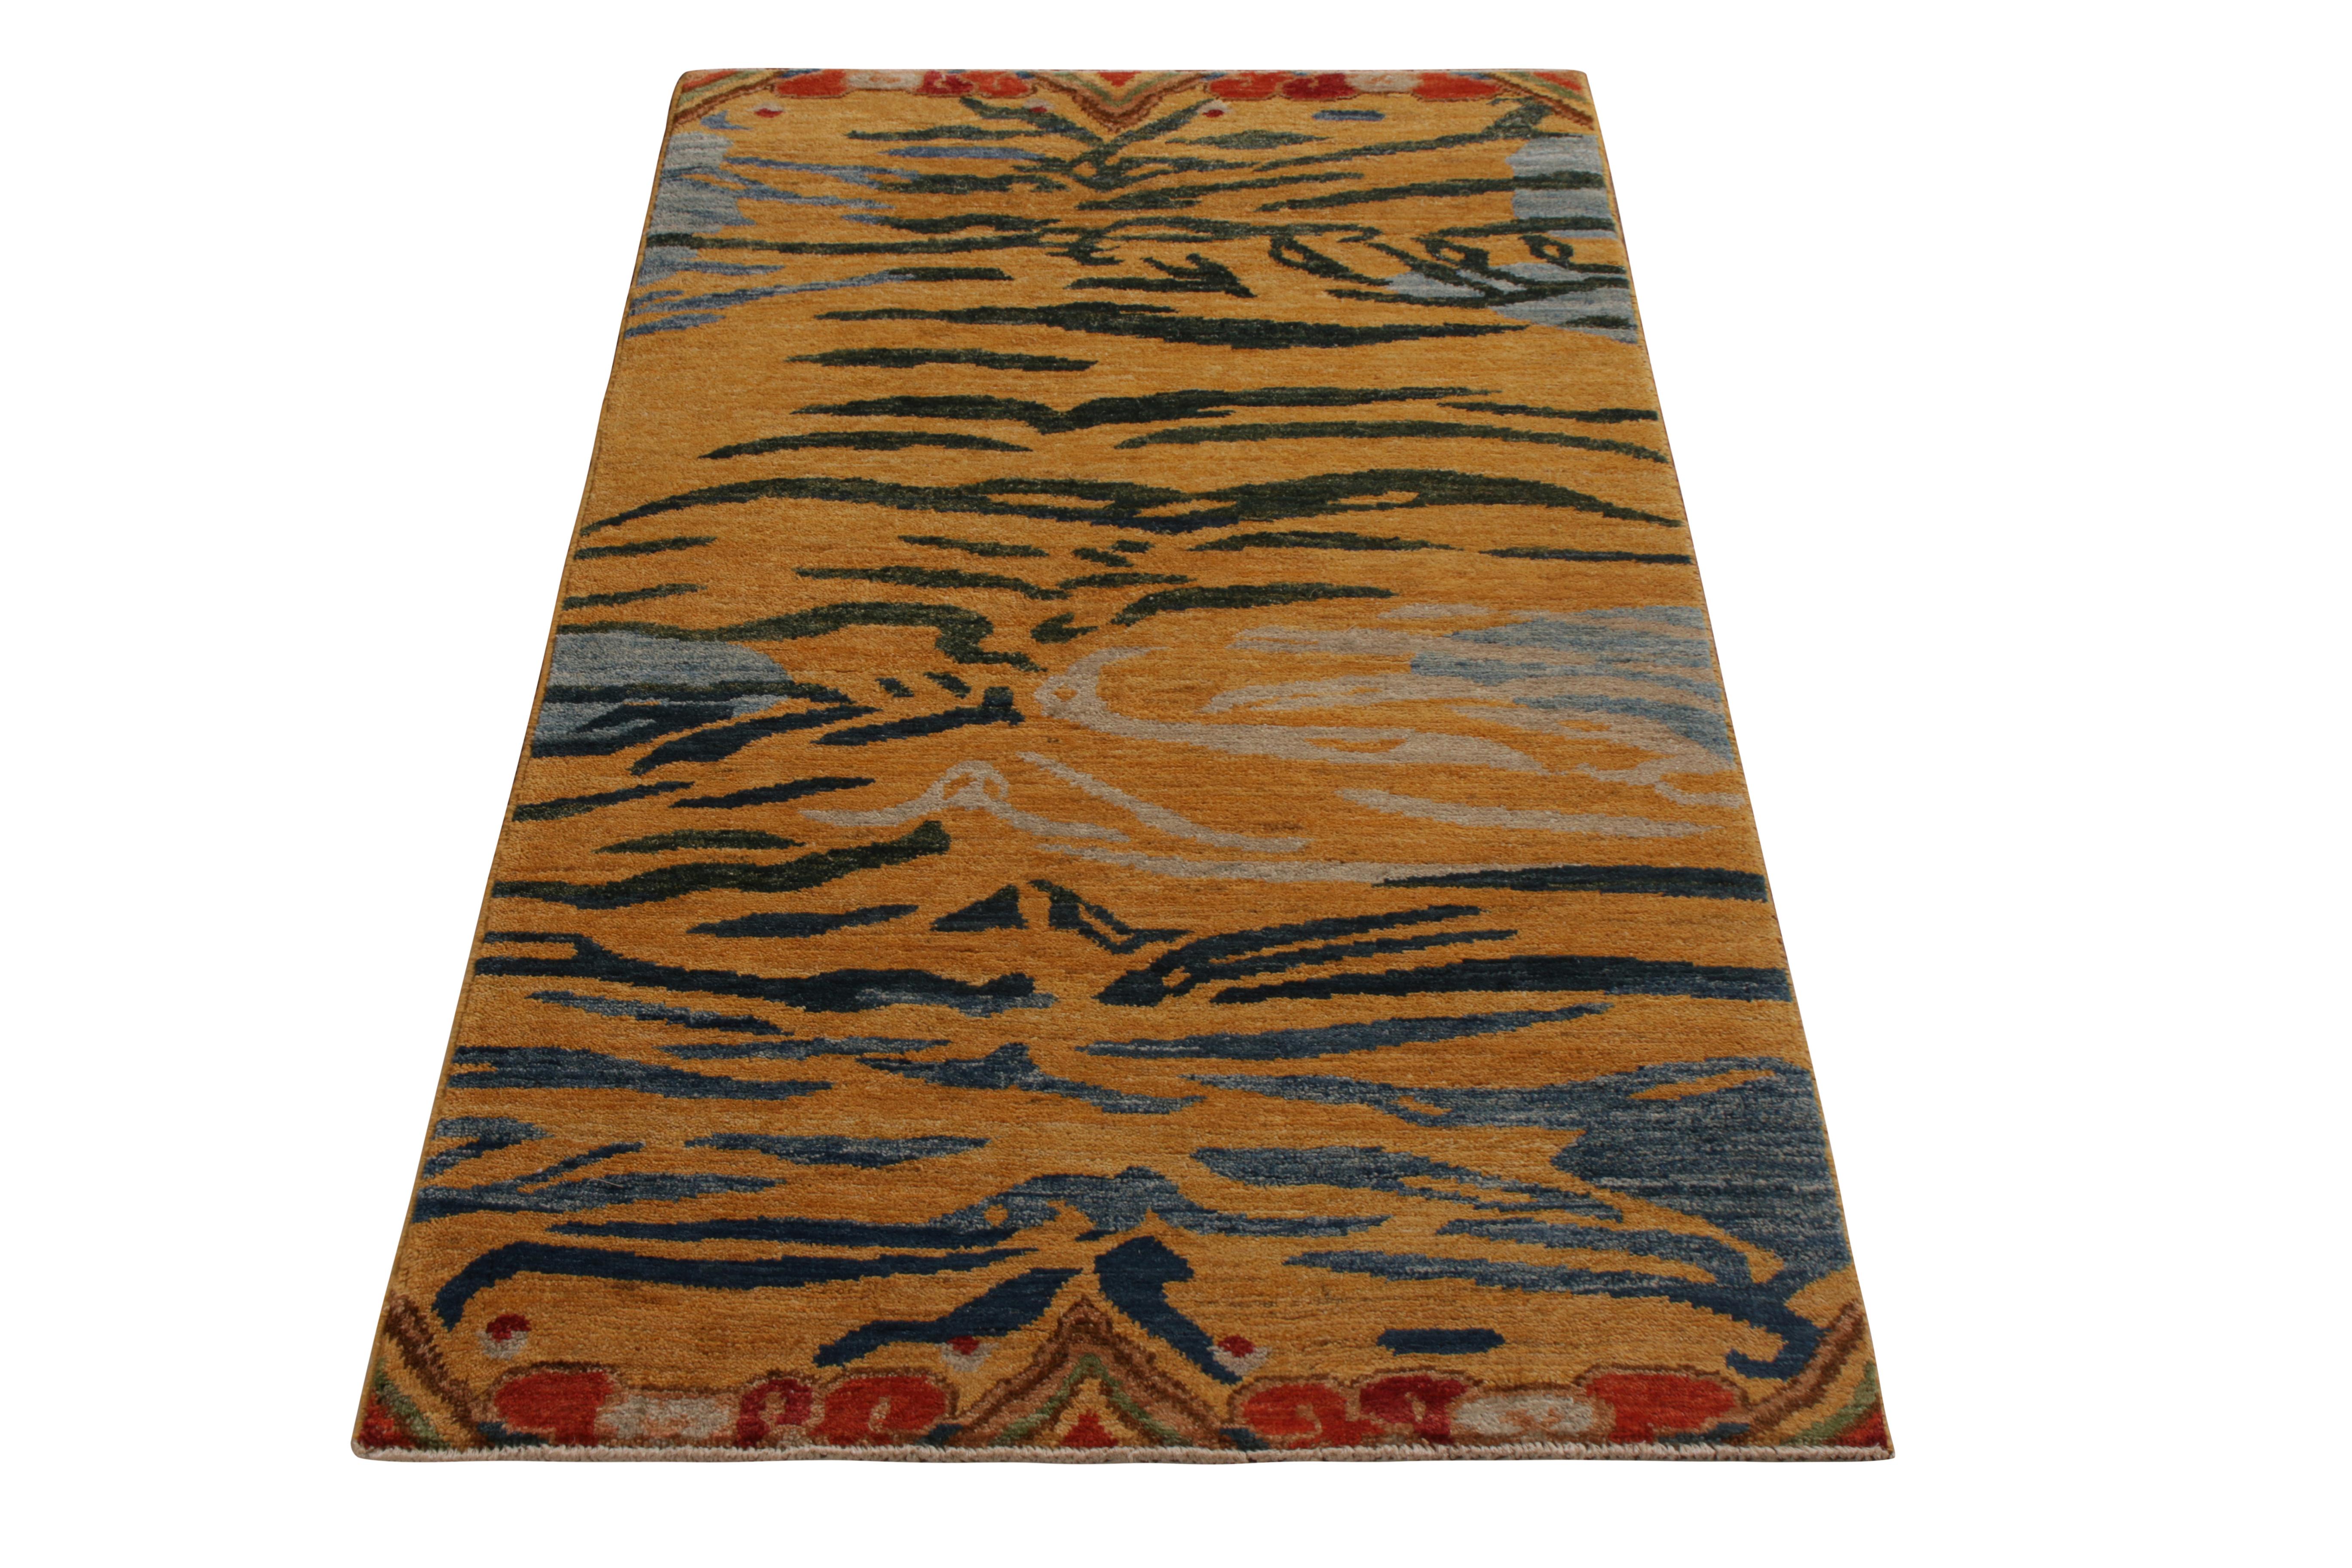 A 3x5 ode to celebrated Tiger rug styles from the titular new collection by Rug & Kilim. Hand knotted in wool, nodding to classic Tibetan abstractions of flayed Tiger stripes in abrashed orange and blue hues. Enjoying an iconic look with a sense of